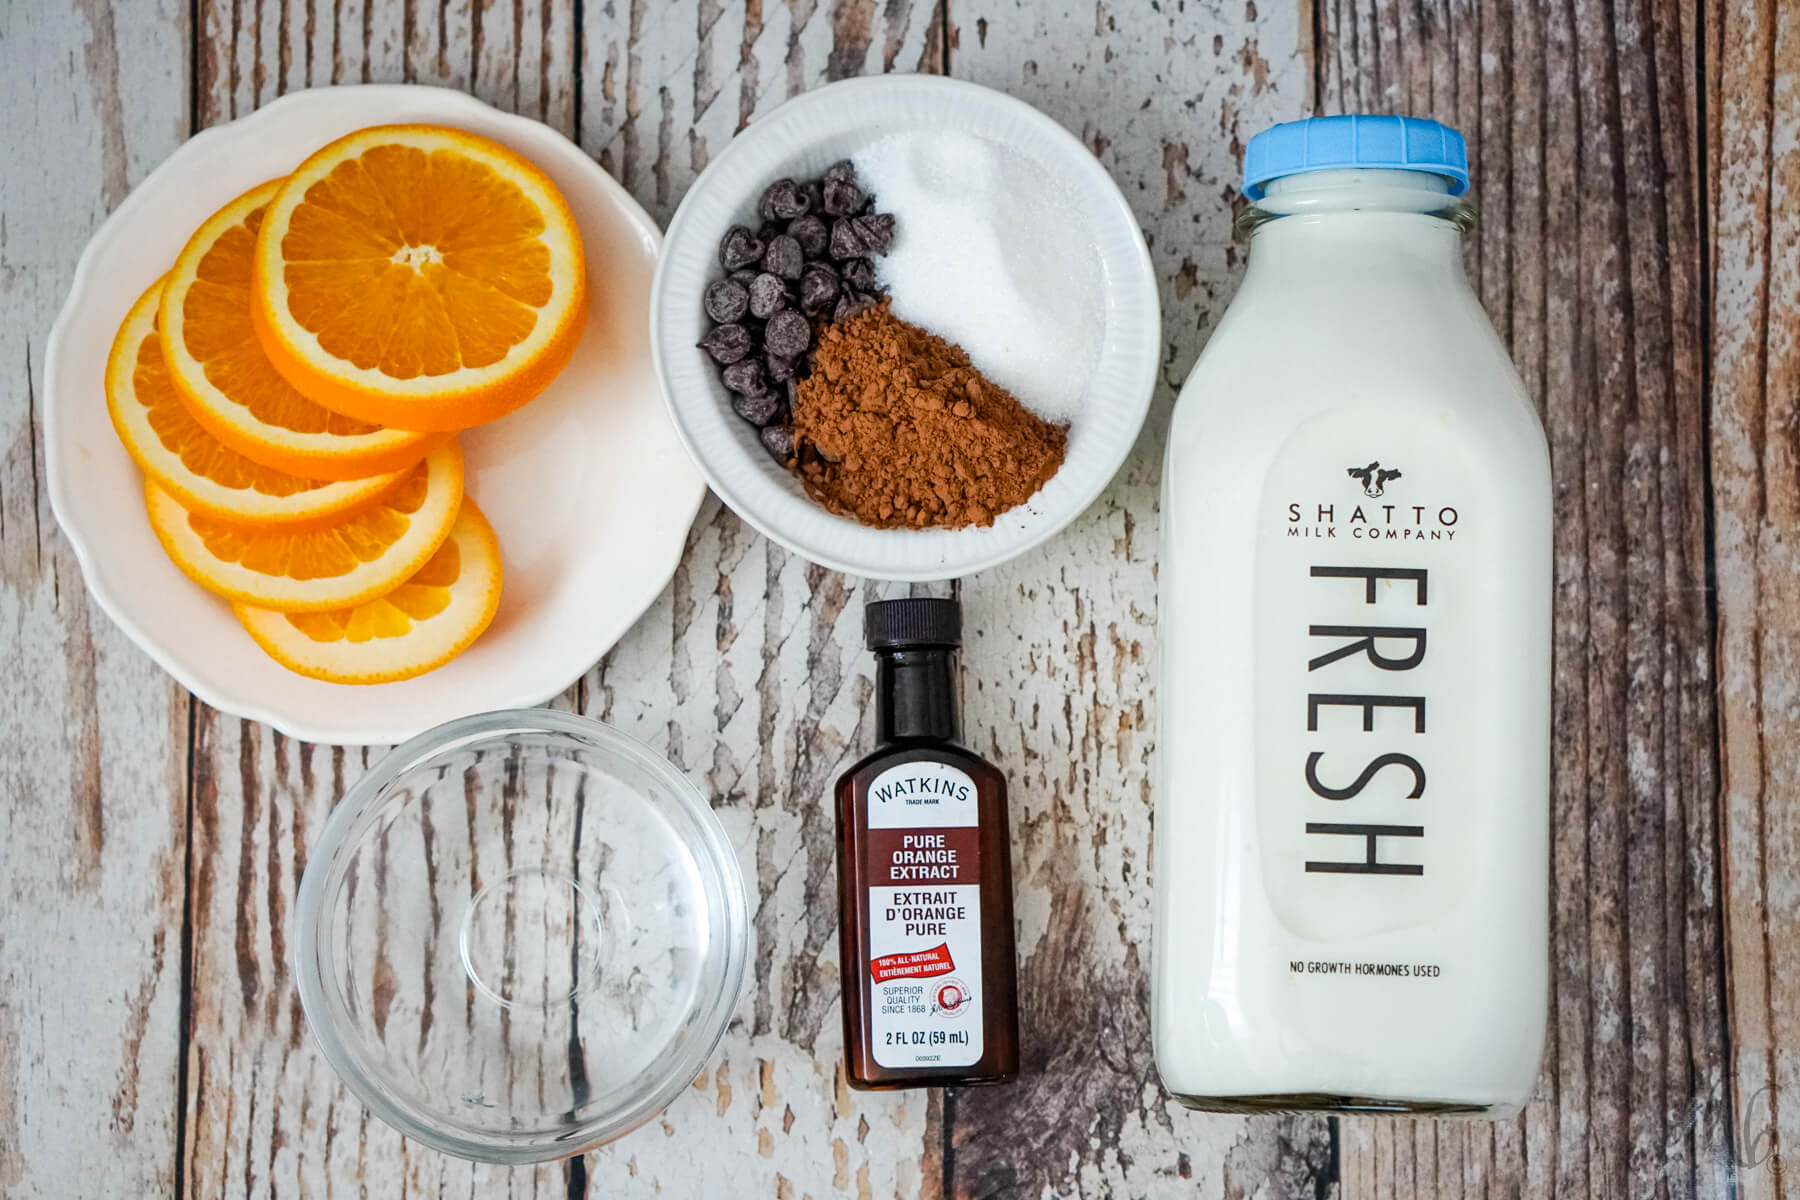 Slices of orange on a white plate, a bowls of granulated sugar, cocoa powder, and semi-sweet chocolate chips in a white bowl, a bowl of water, a bottle of orange extract, and a bottle of Shatto milk.